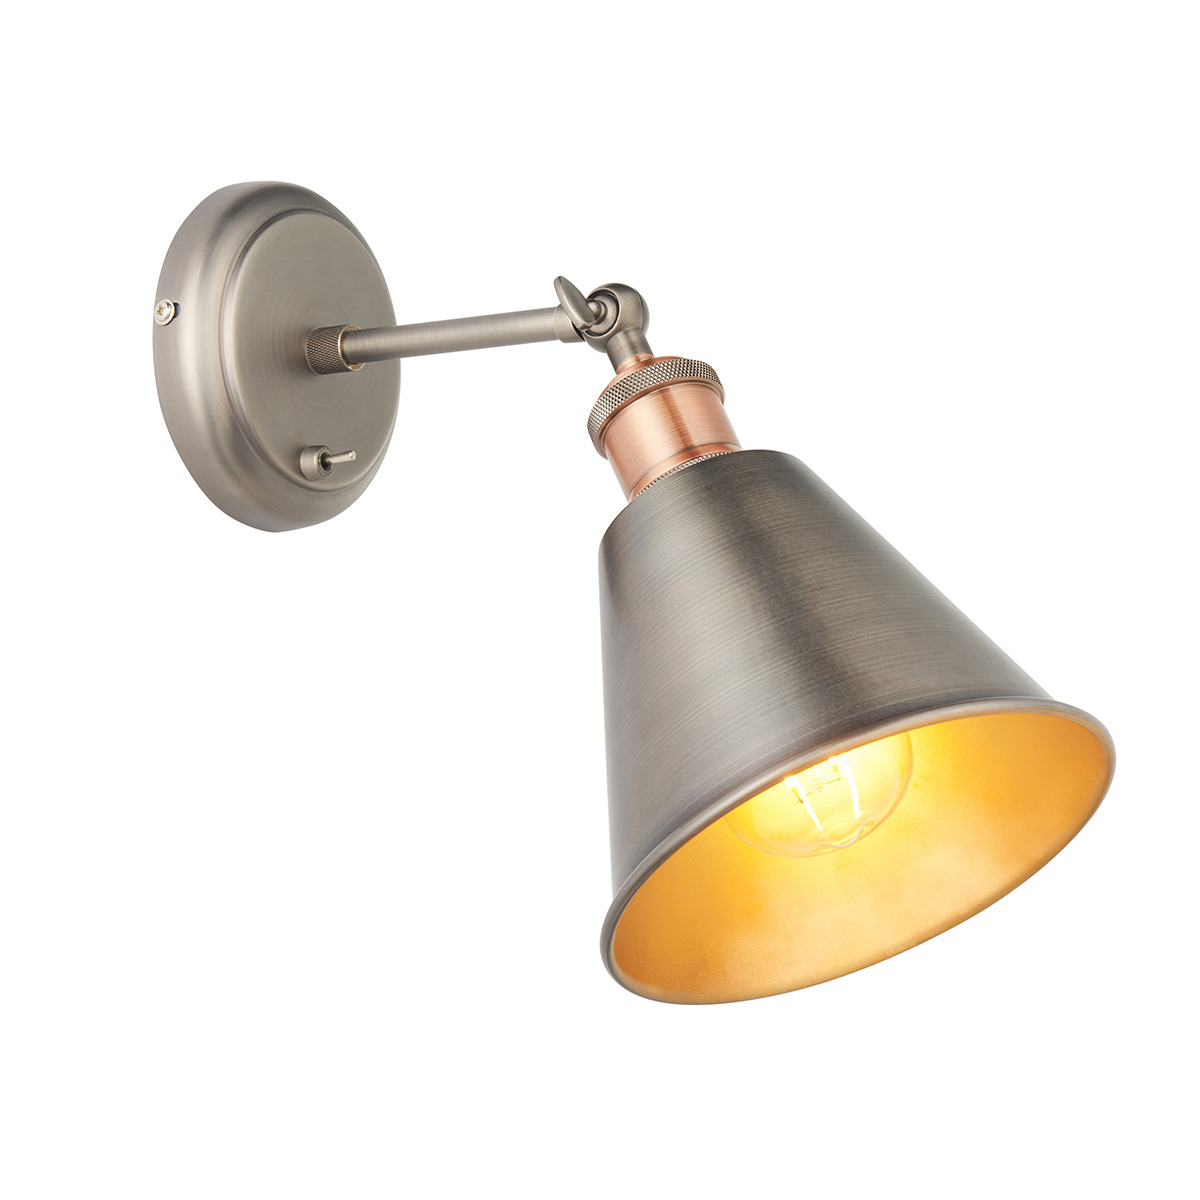 Anker Wall Light in Aged Pewter and Aged Copper